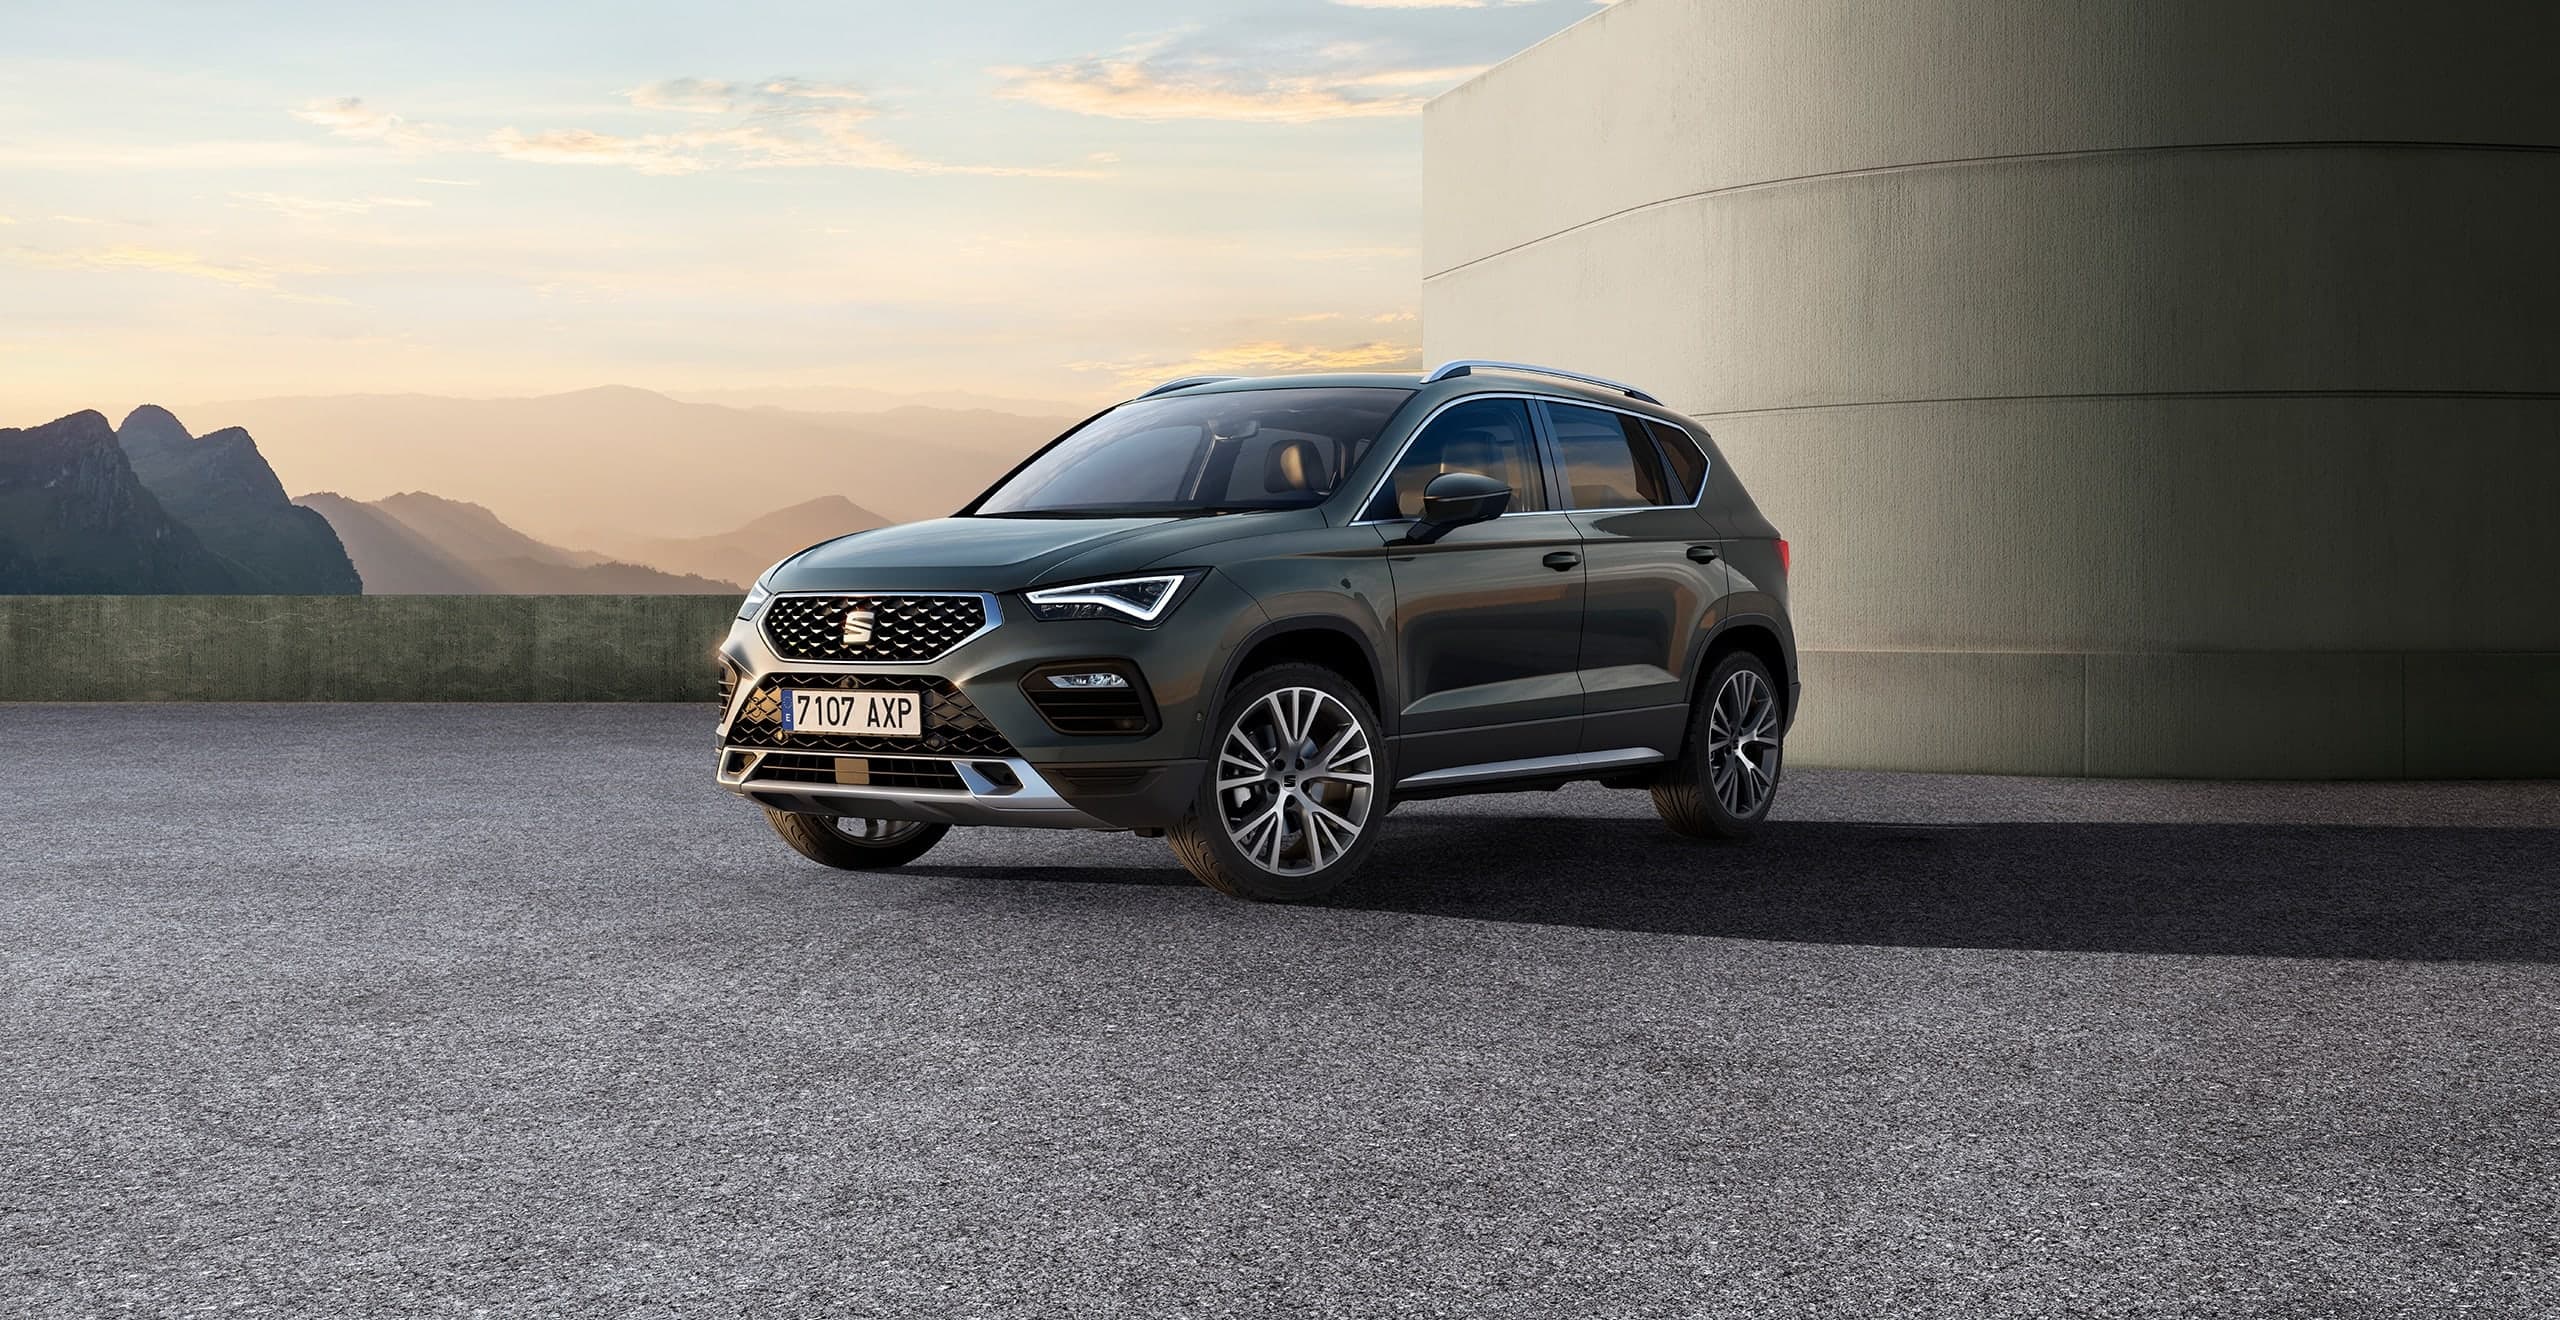 New SEAT Ateca in dark camouflage exterior rear side view with reflex silver accents.